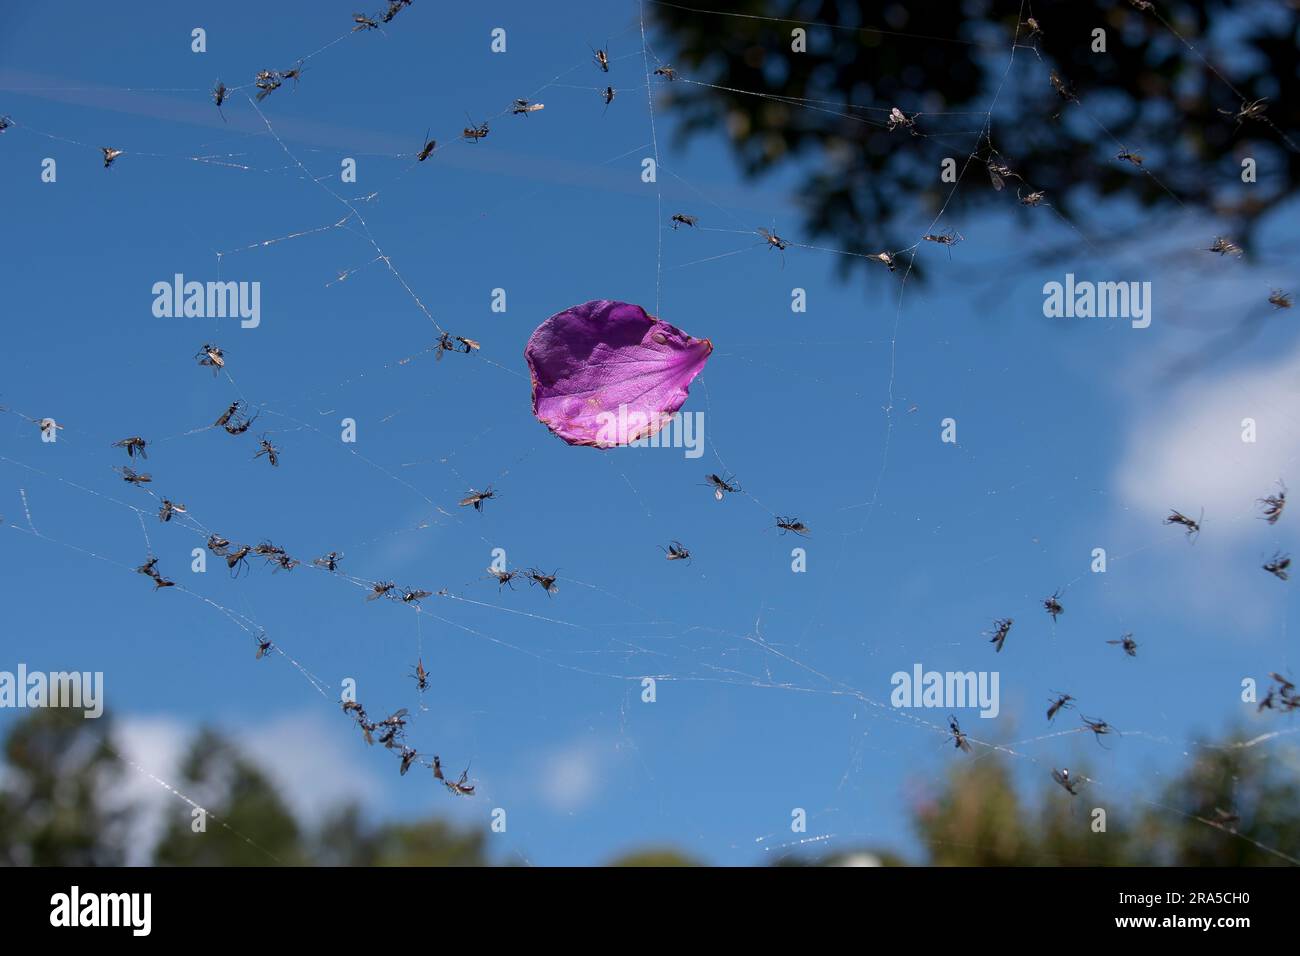 Hundreds of flying dome-backed spiny ants, polyrhachis Australia, caught in spider's web with one purple petal, against blue sky. Queensland garden. Stock Photo